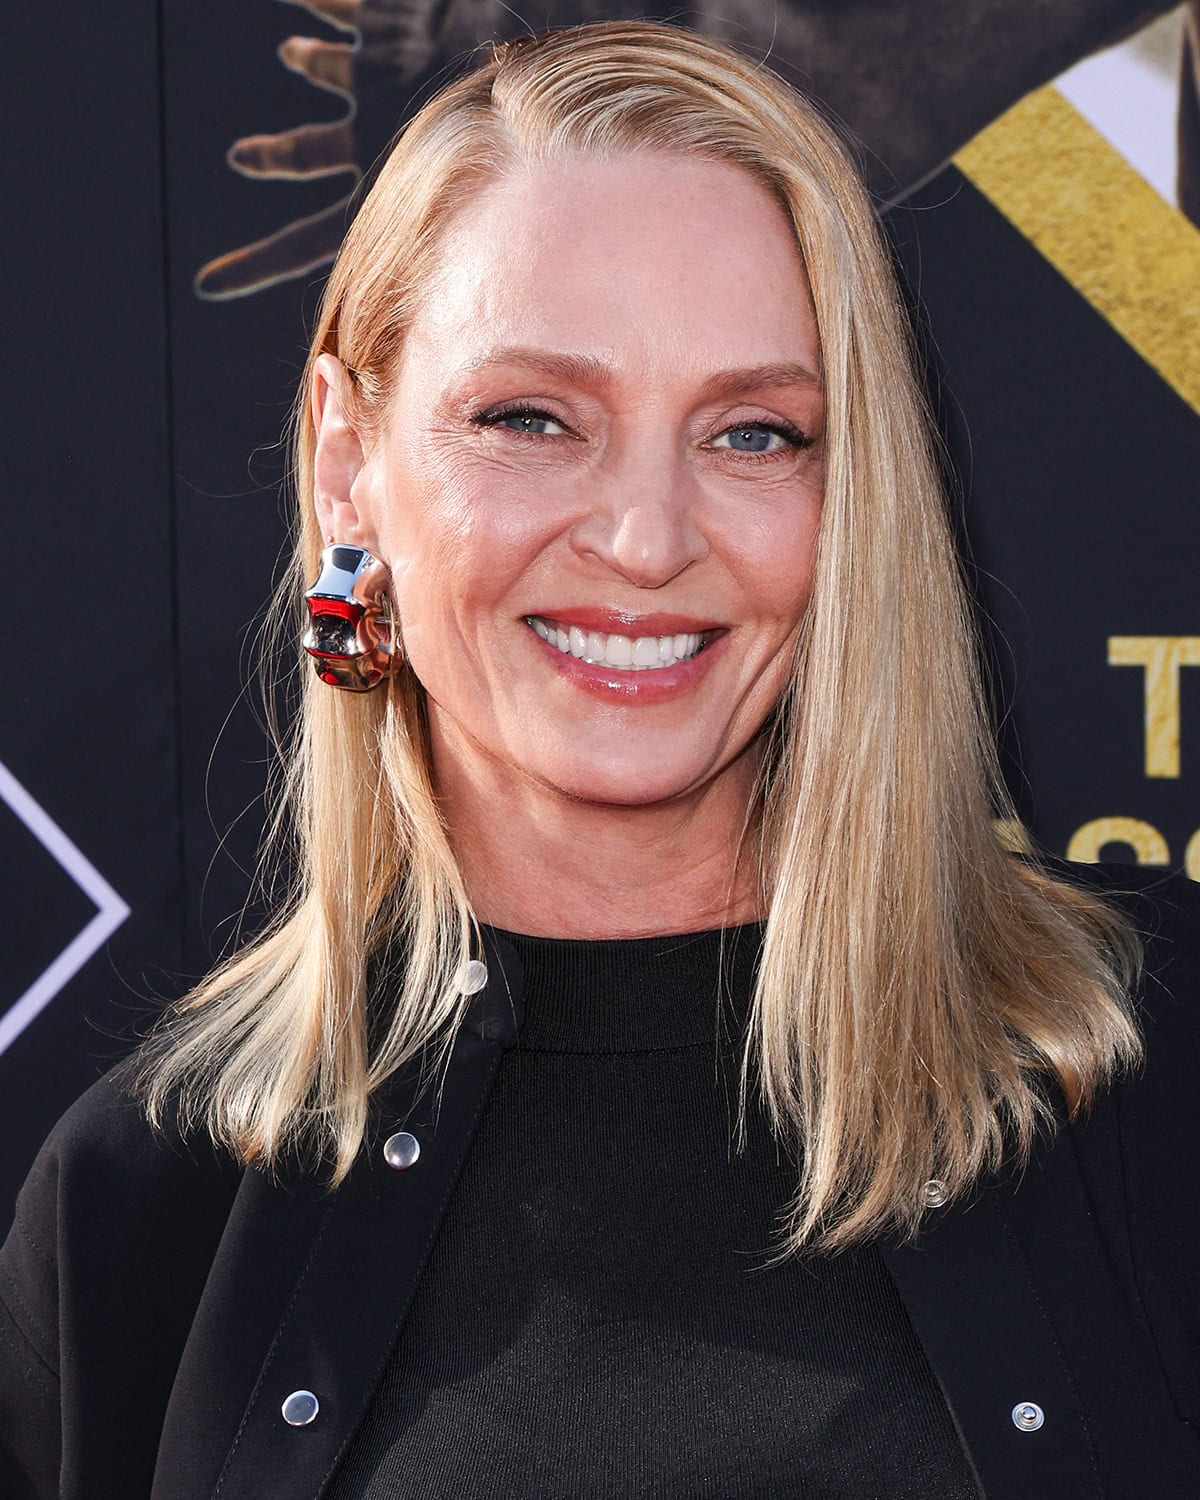 Uma Thurman displays her innate beauty with soft pink makeup and a straight, side-parted hairstyle